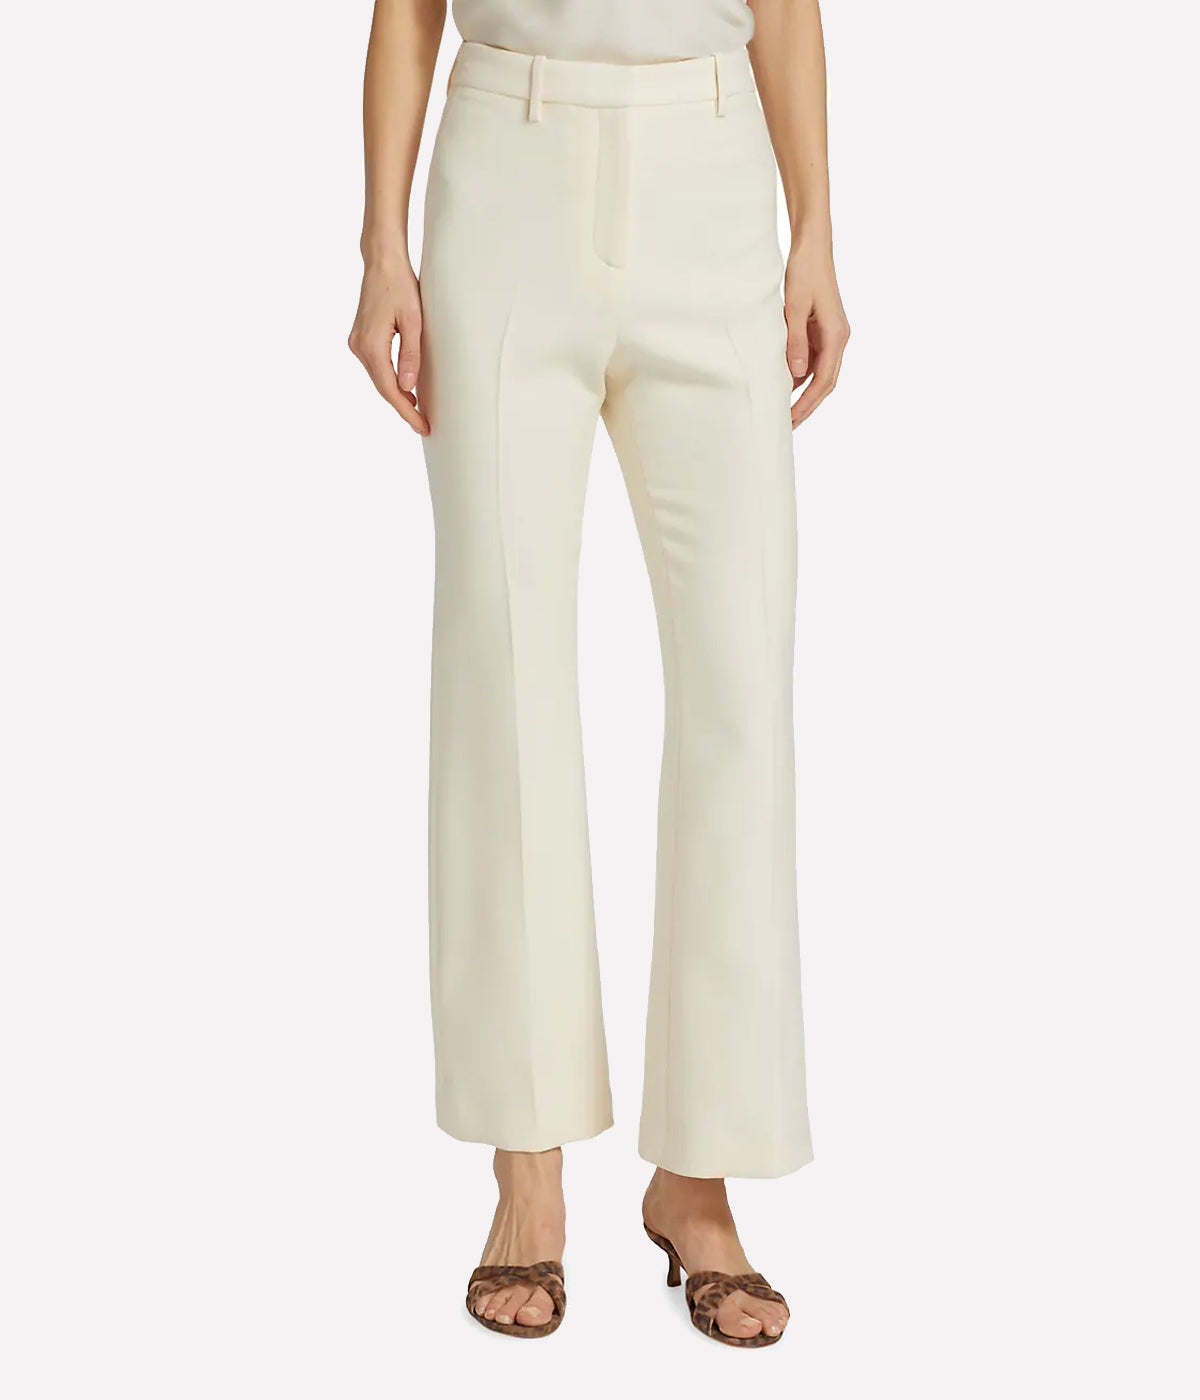 Cropped Corette Pant in Ivory